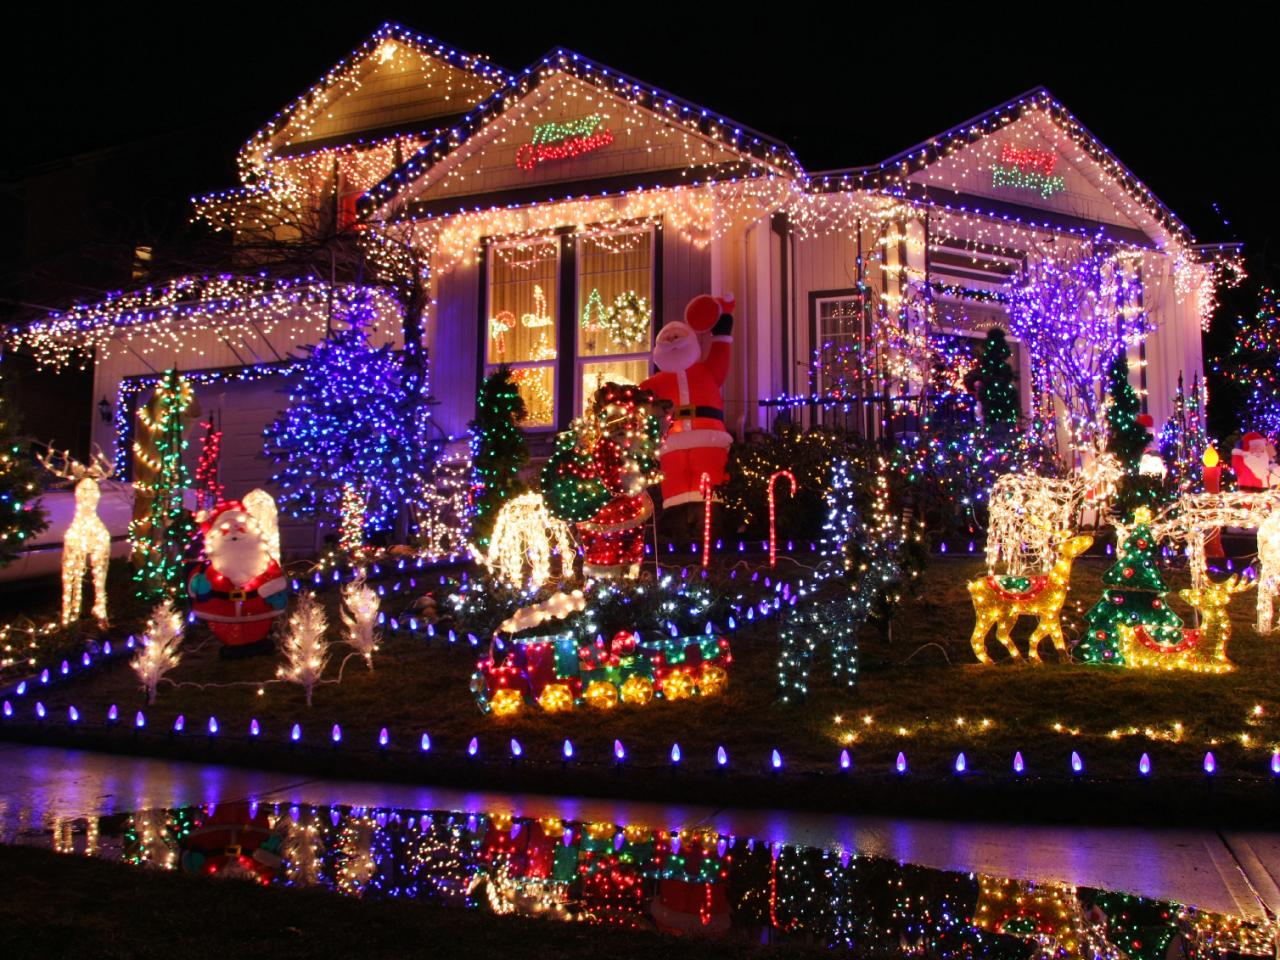 Buyers Guide For The Best Outdoor Christmas Lighting Diy for xmas house lights regarding Your own home